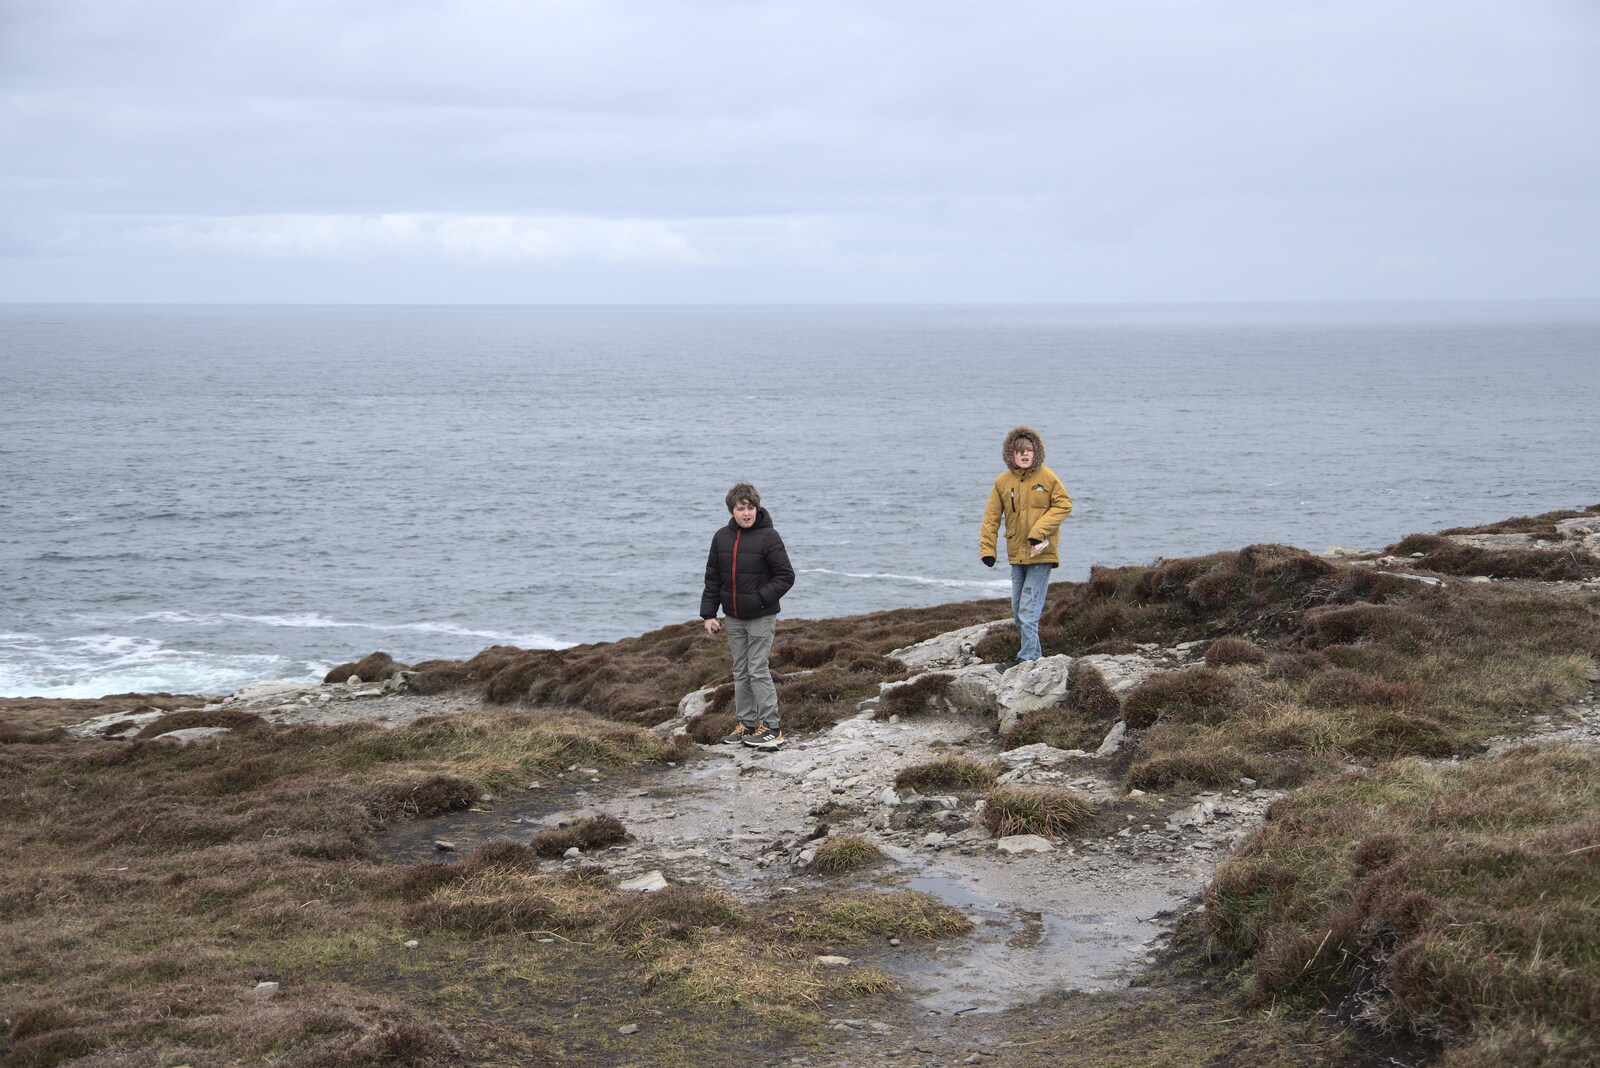 Greencastle, Doagh and Malin Head, County Donegal, Ireland - 19th April 2022: The boys on the cliff at Malin Head